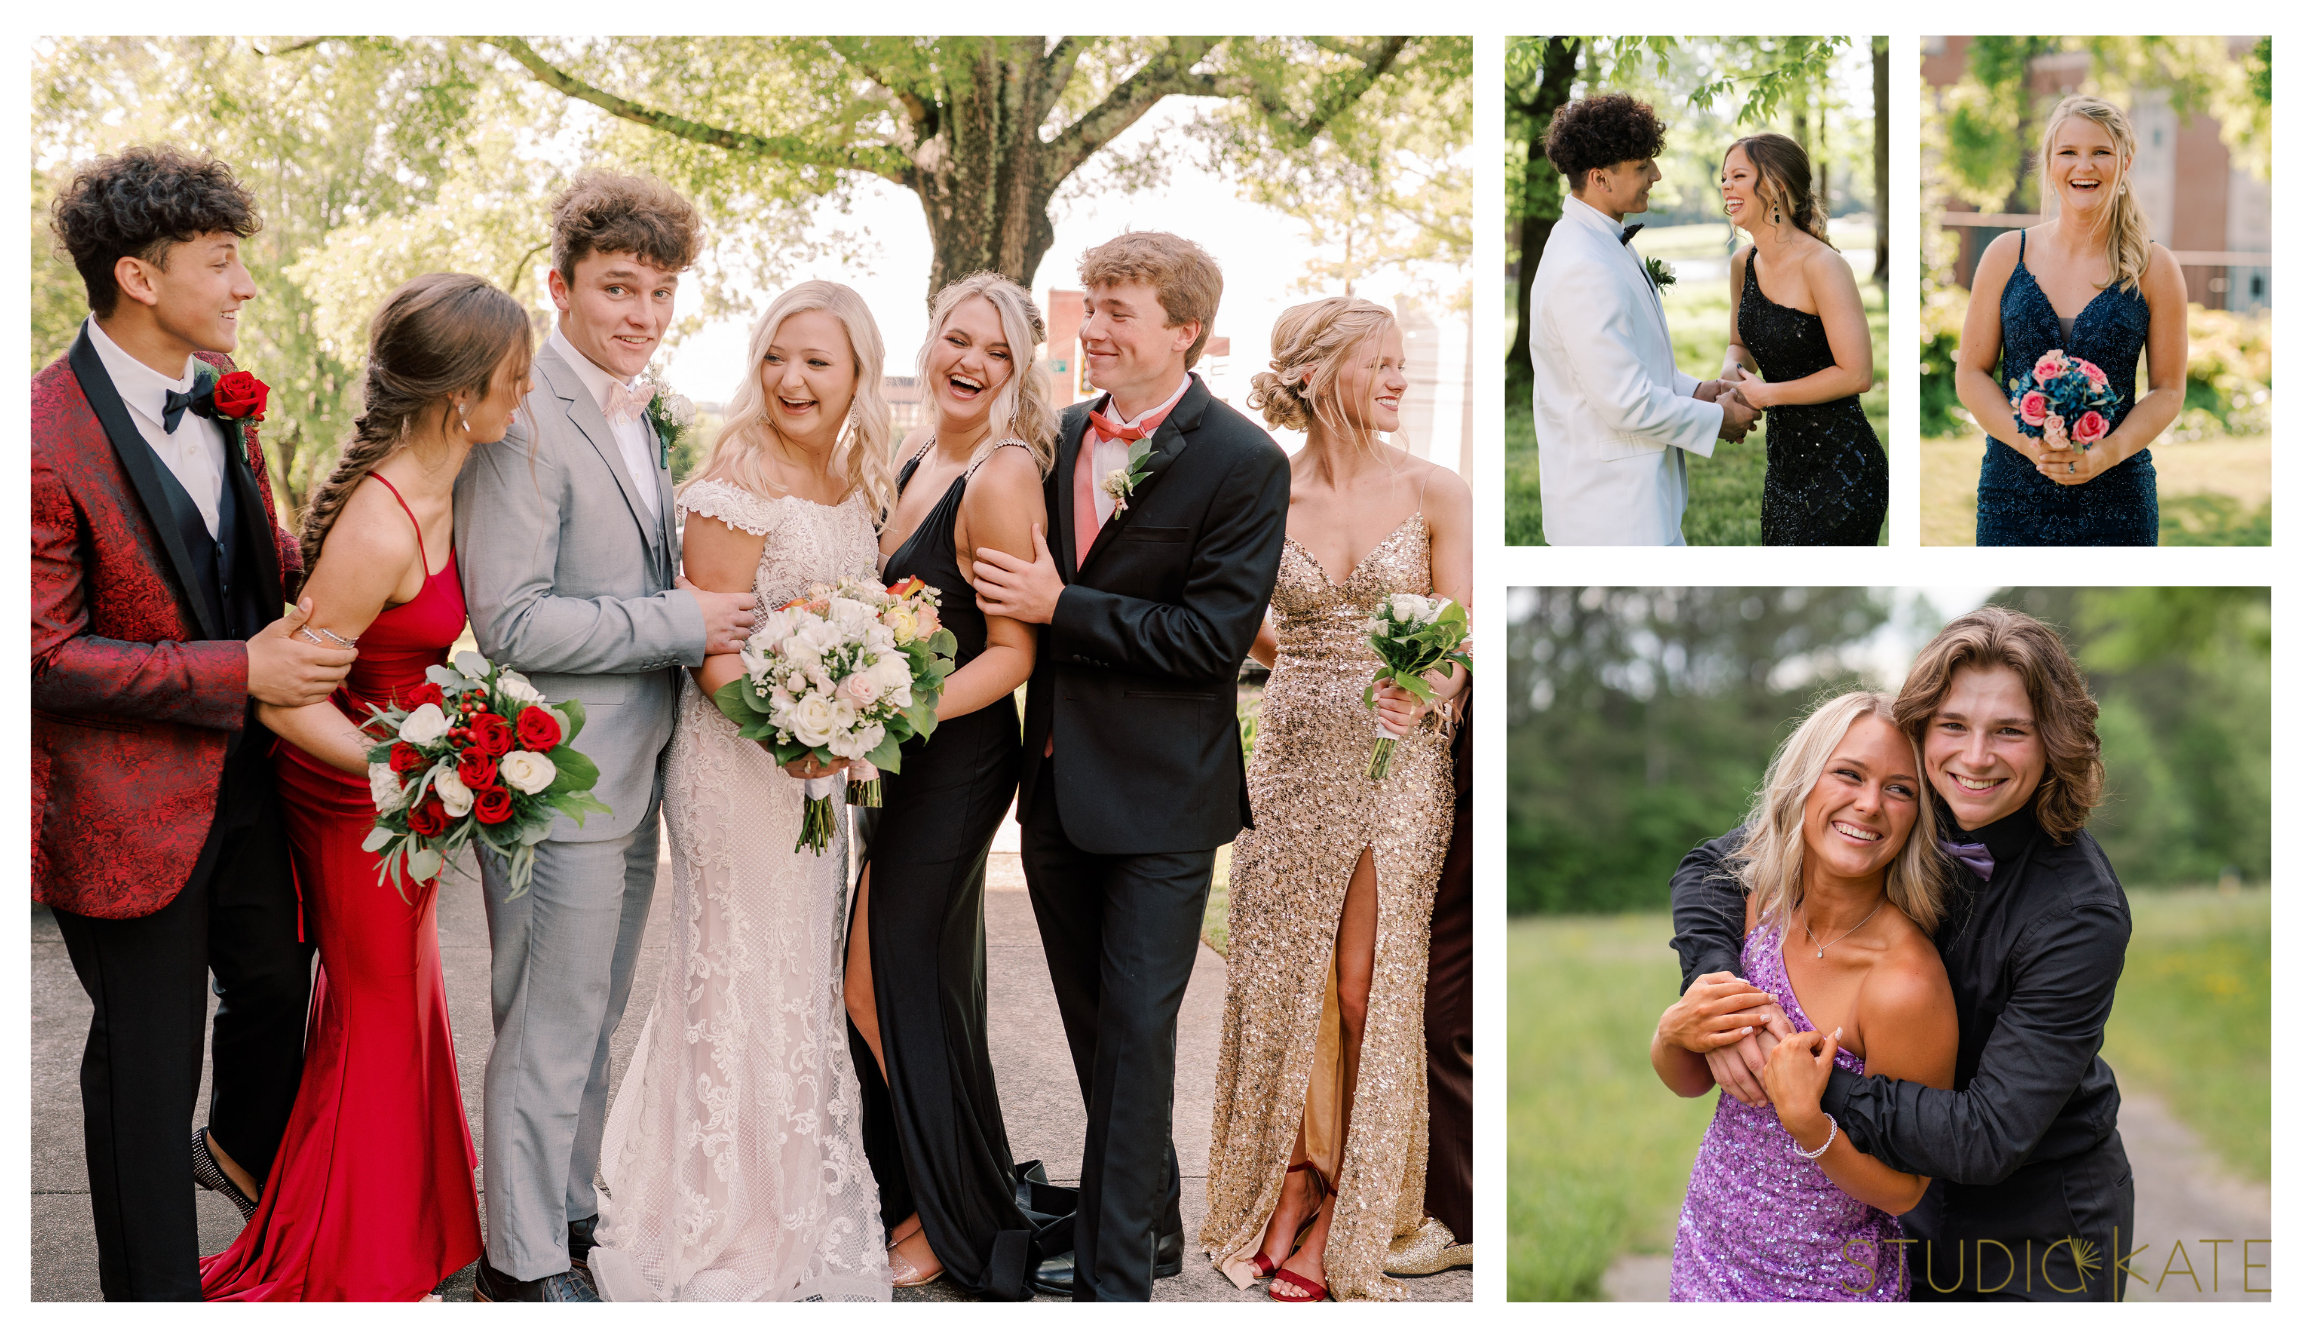 Prom detail photos. Top 5 photos to take at prom. Prom photo guide. rome georgia senior photographer. friend Photos at prom. How to get laughing pictures. 